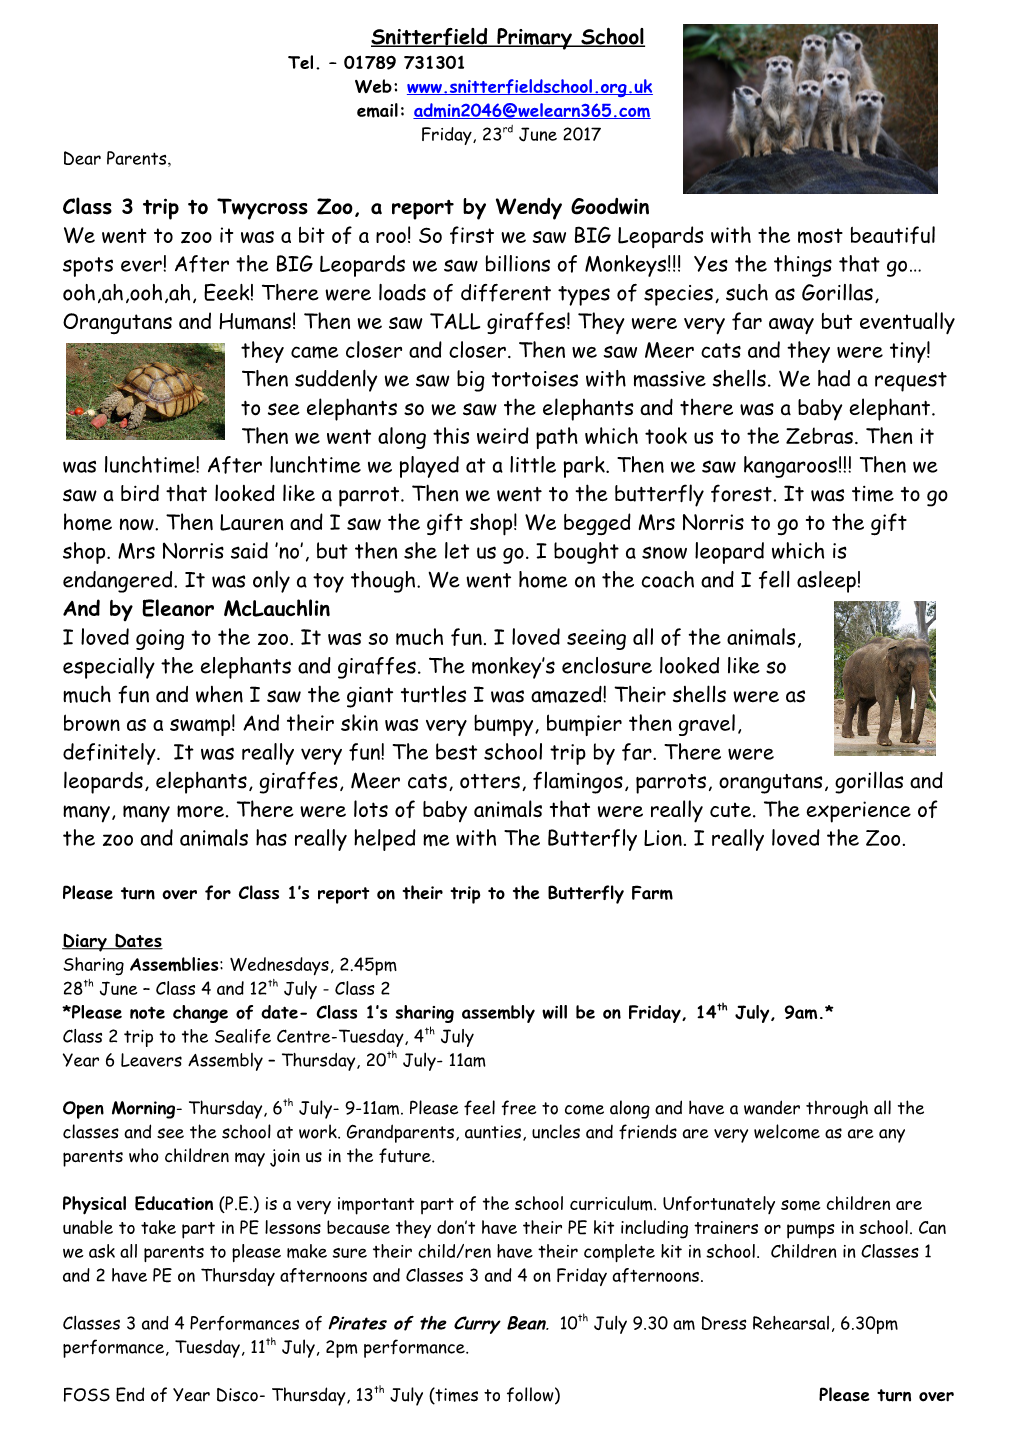 Class 3 Trip to Twycross Zoo, a Report by Wendy Goodwin